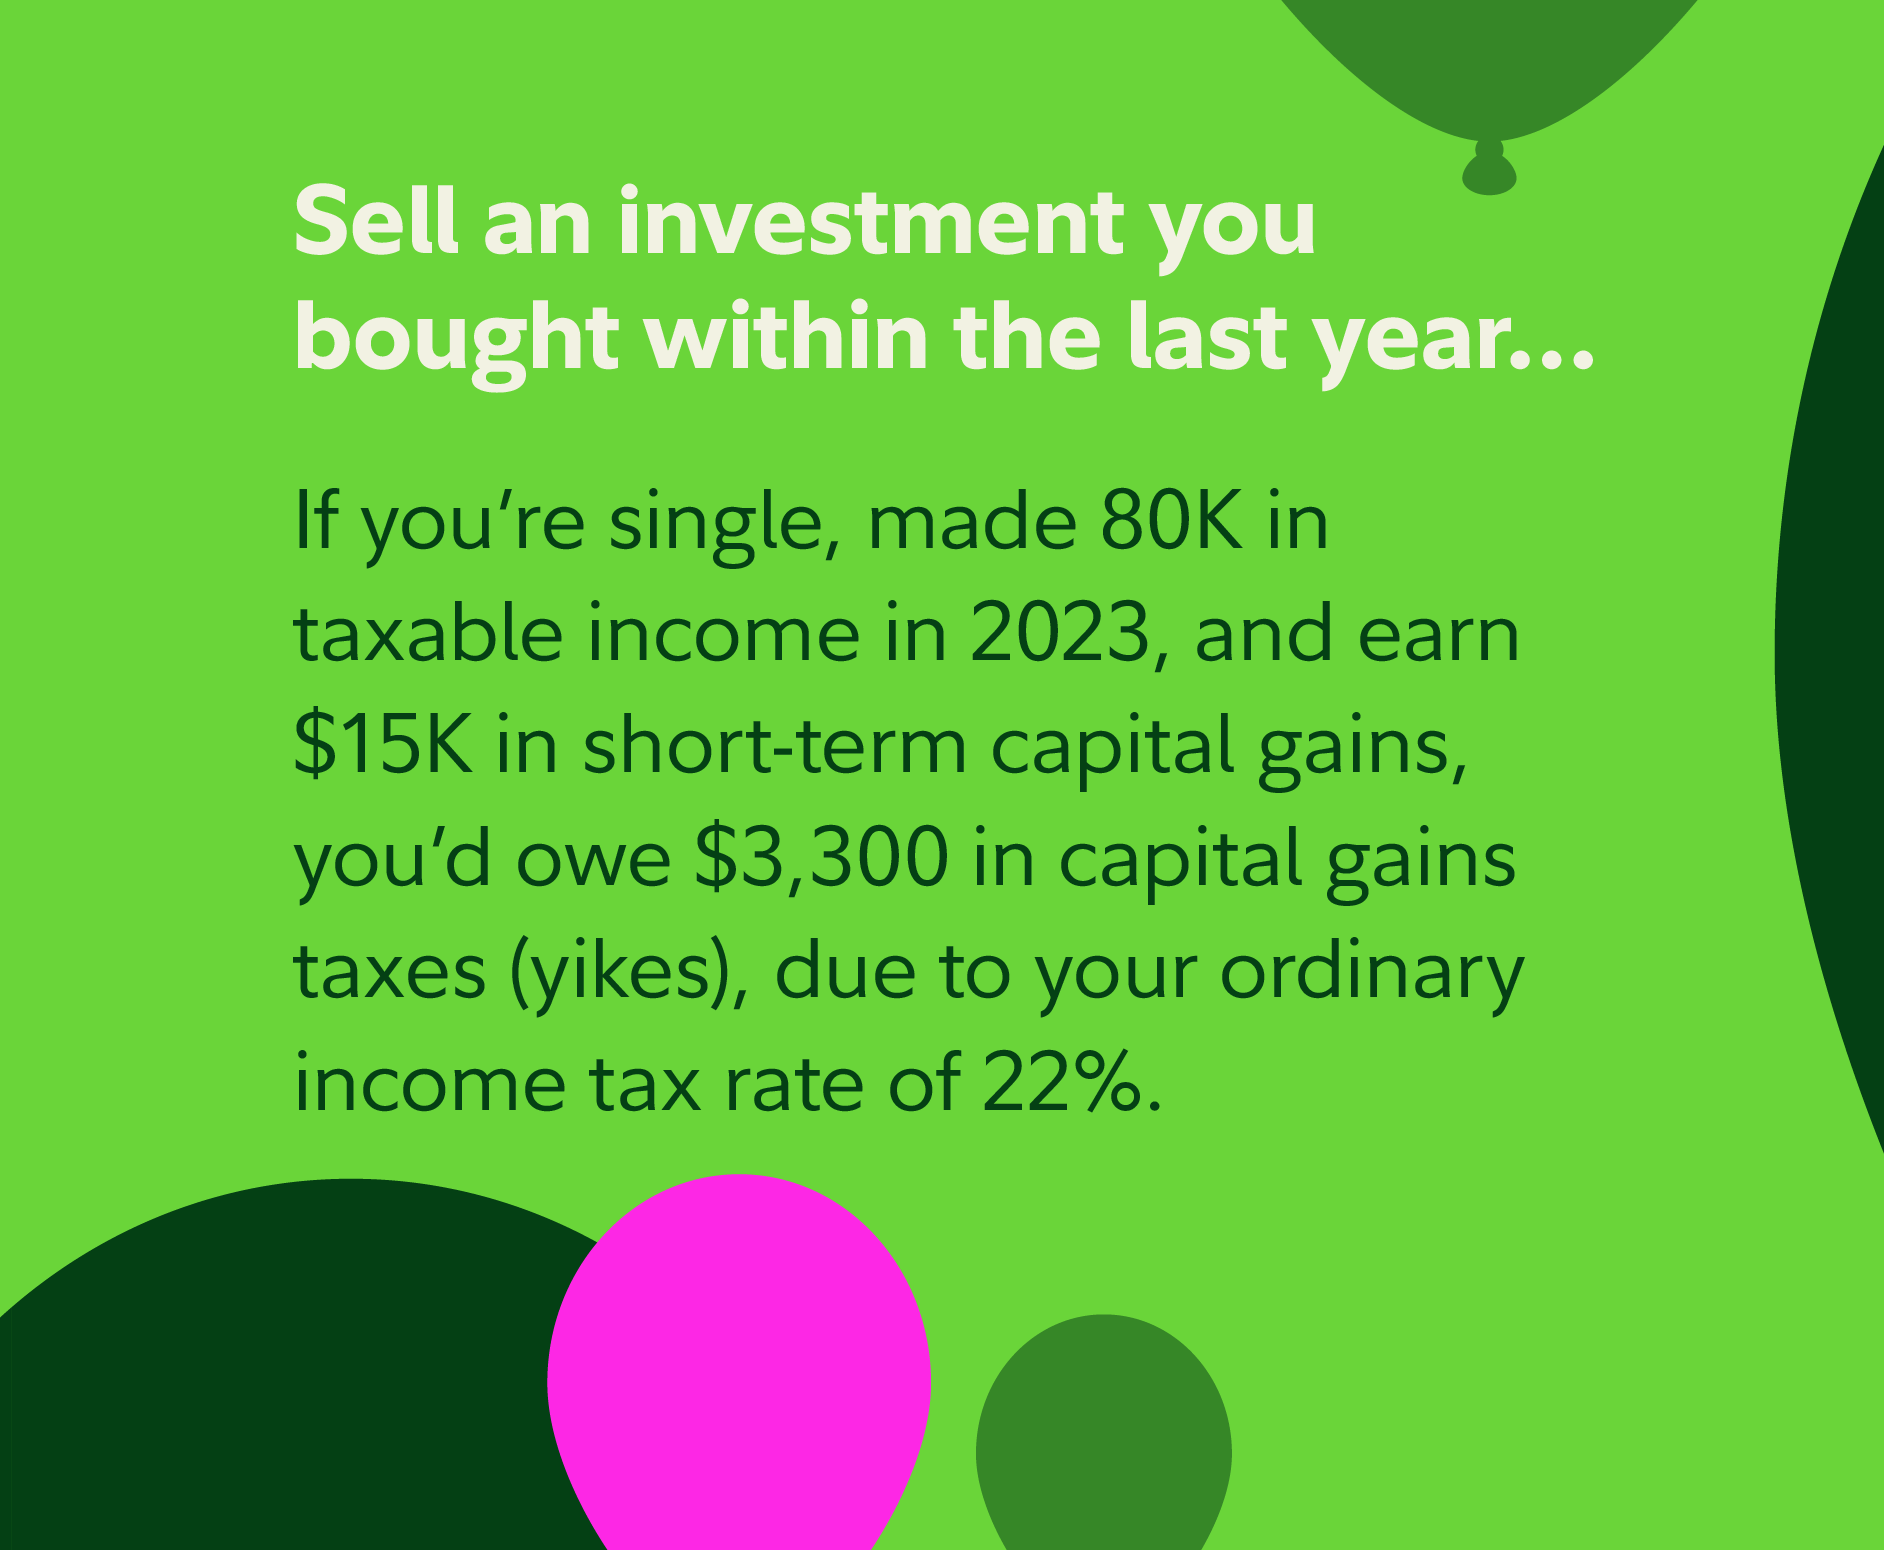 Sell an investment you bought within the last year: If you're single, made 80k in taxable income in 2023, and earn $15k in short-term capital gains, you'd owe $3,300 in capital gains taxes (yikes!), due to your ordinary income tax rate of 22%.